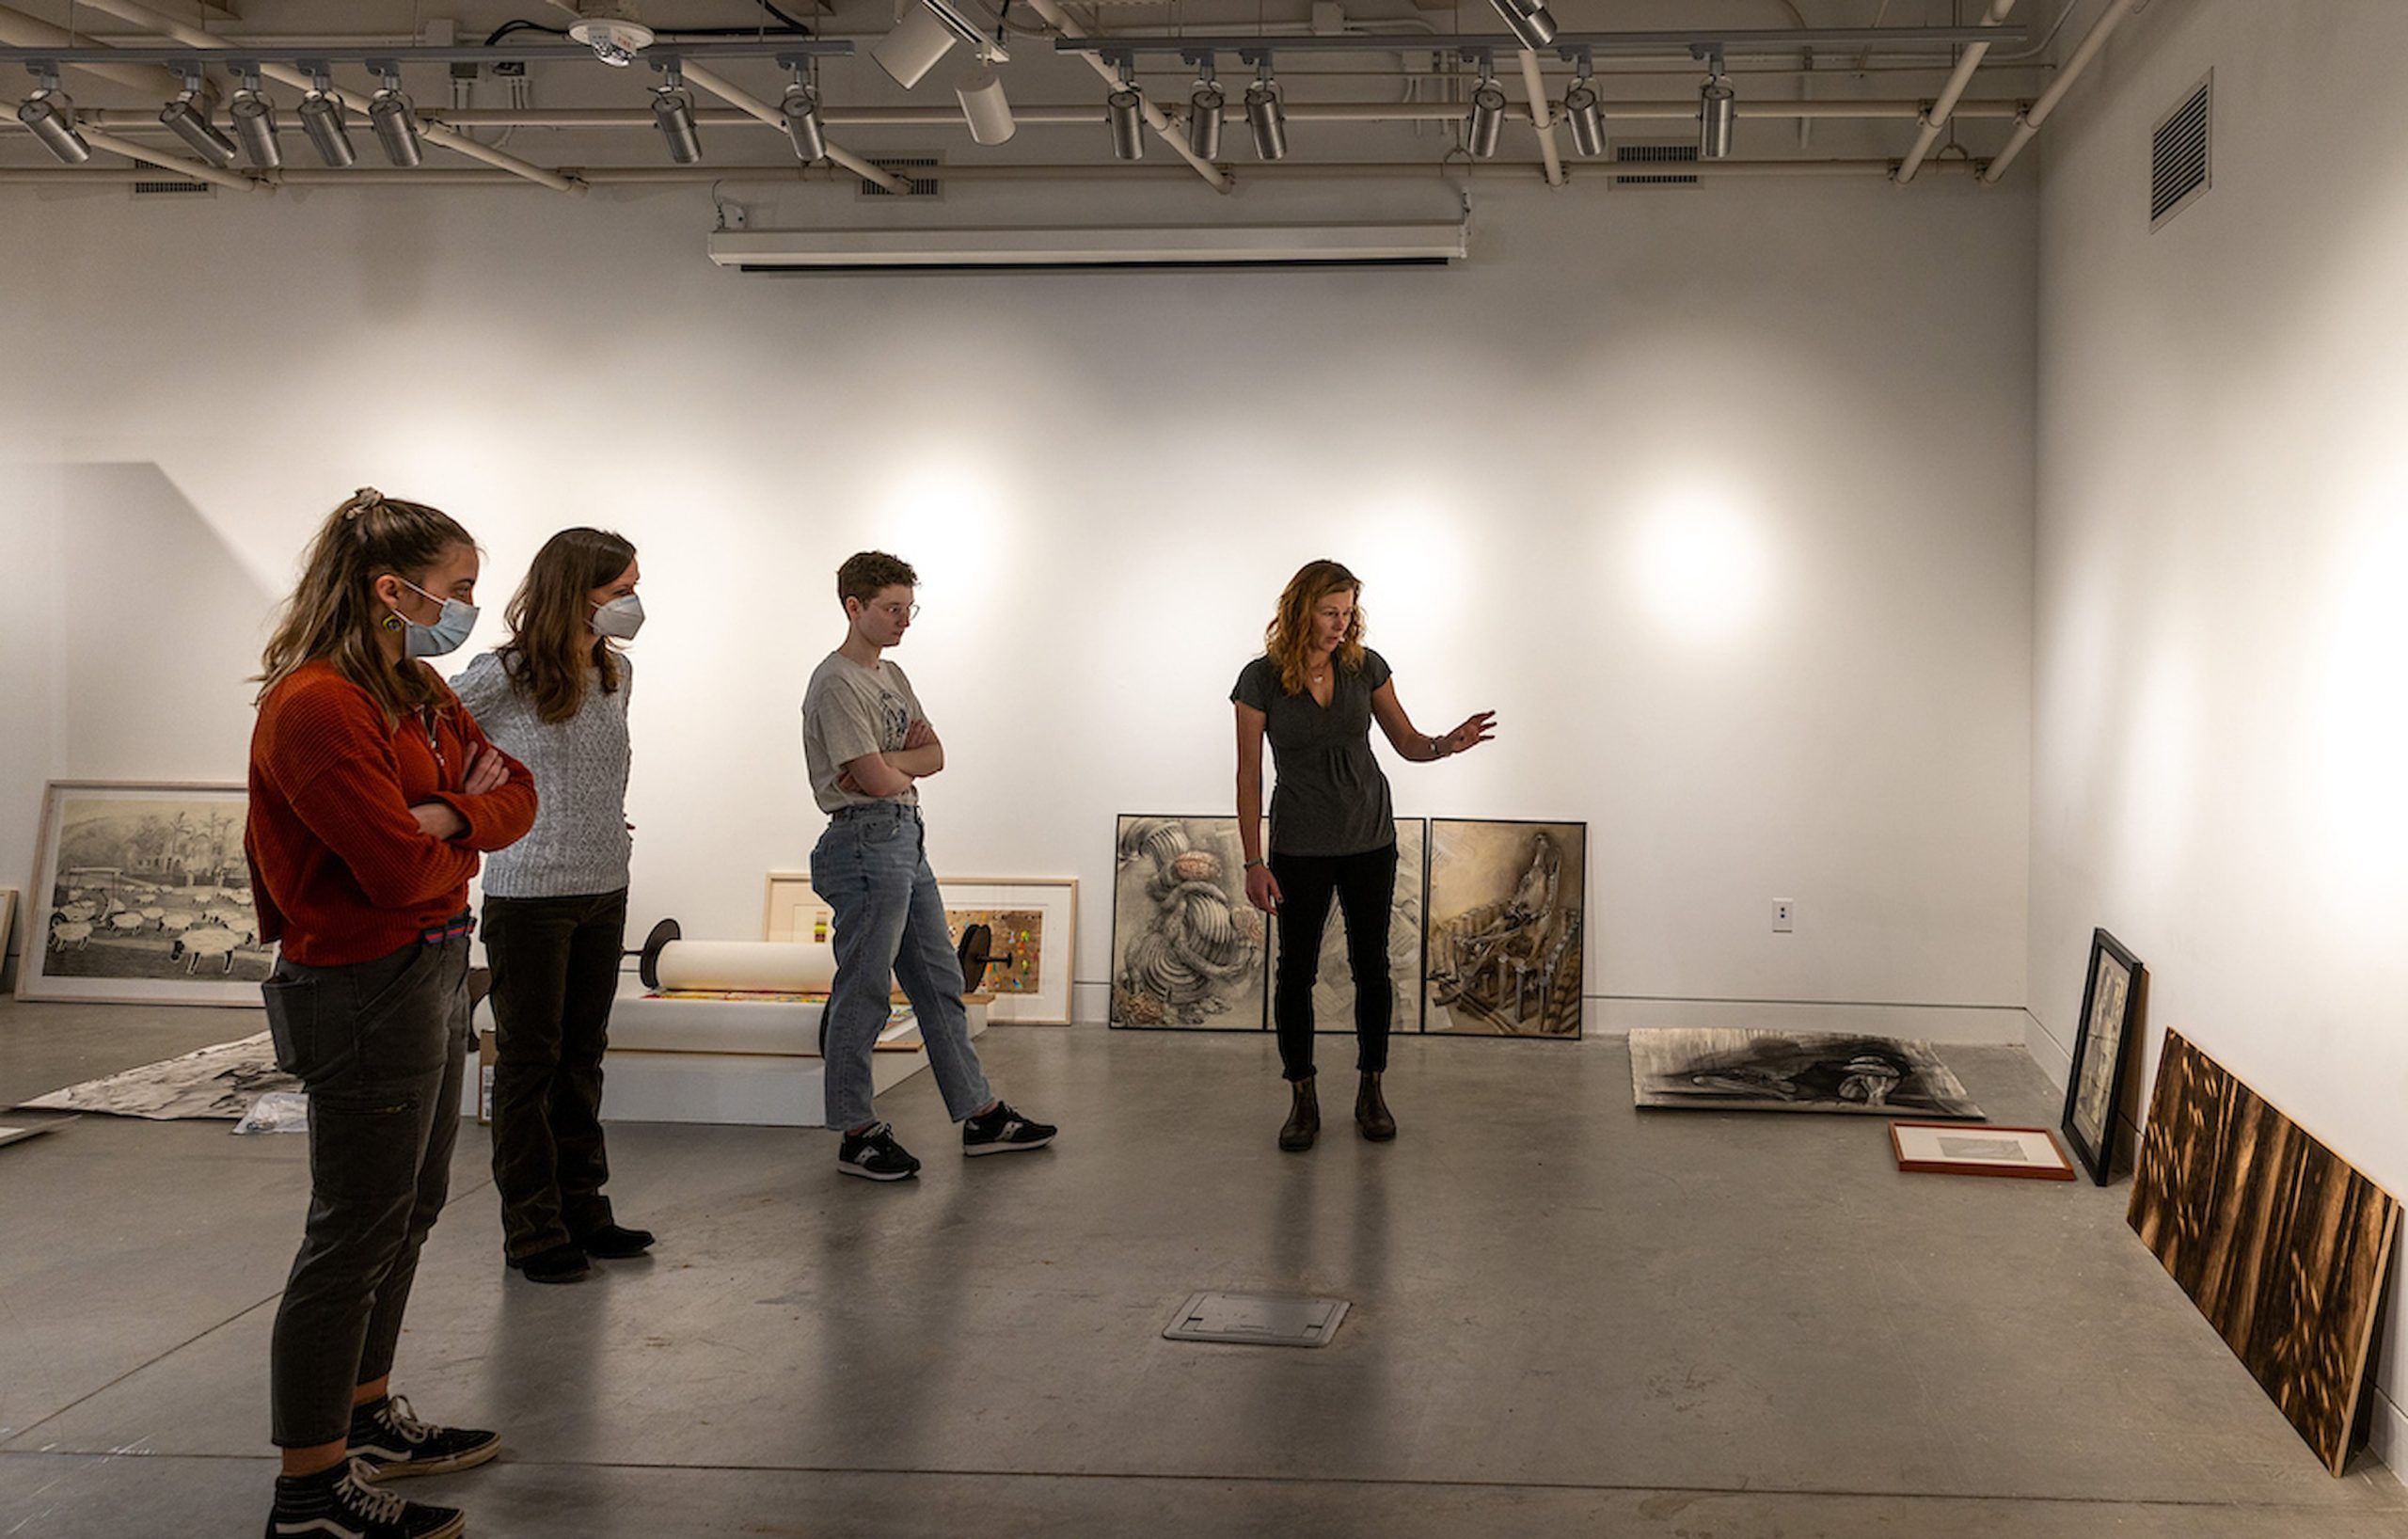 art students examining art in a gallery